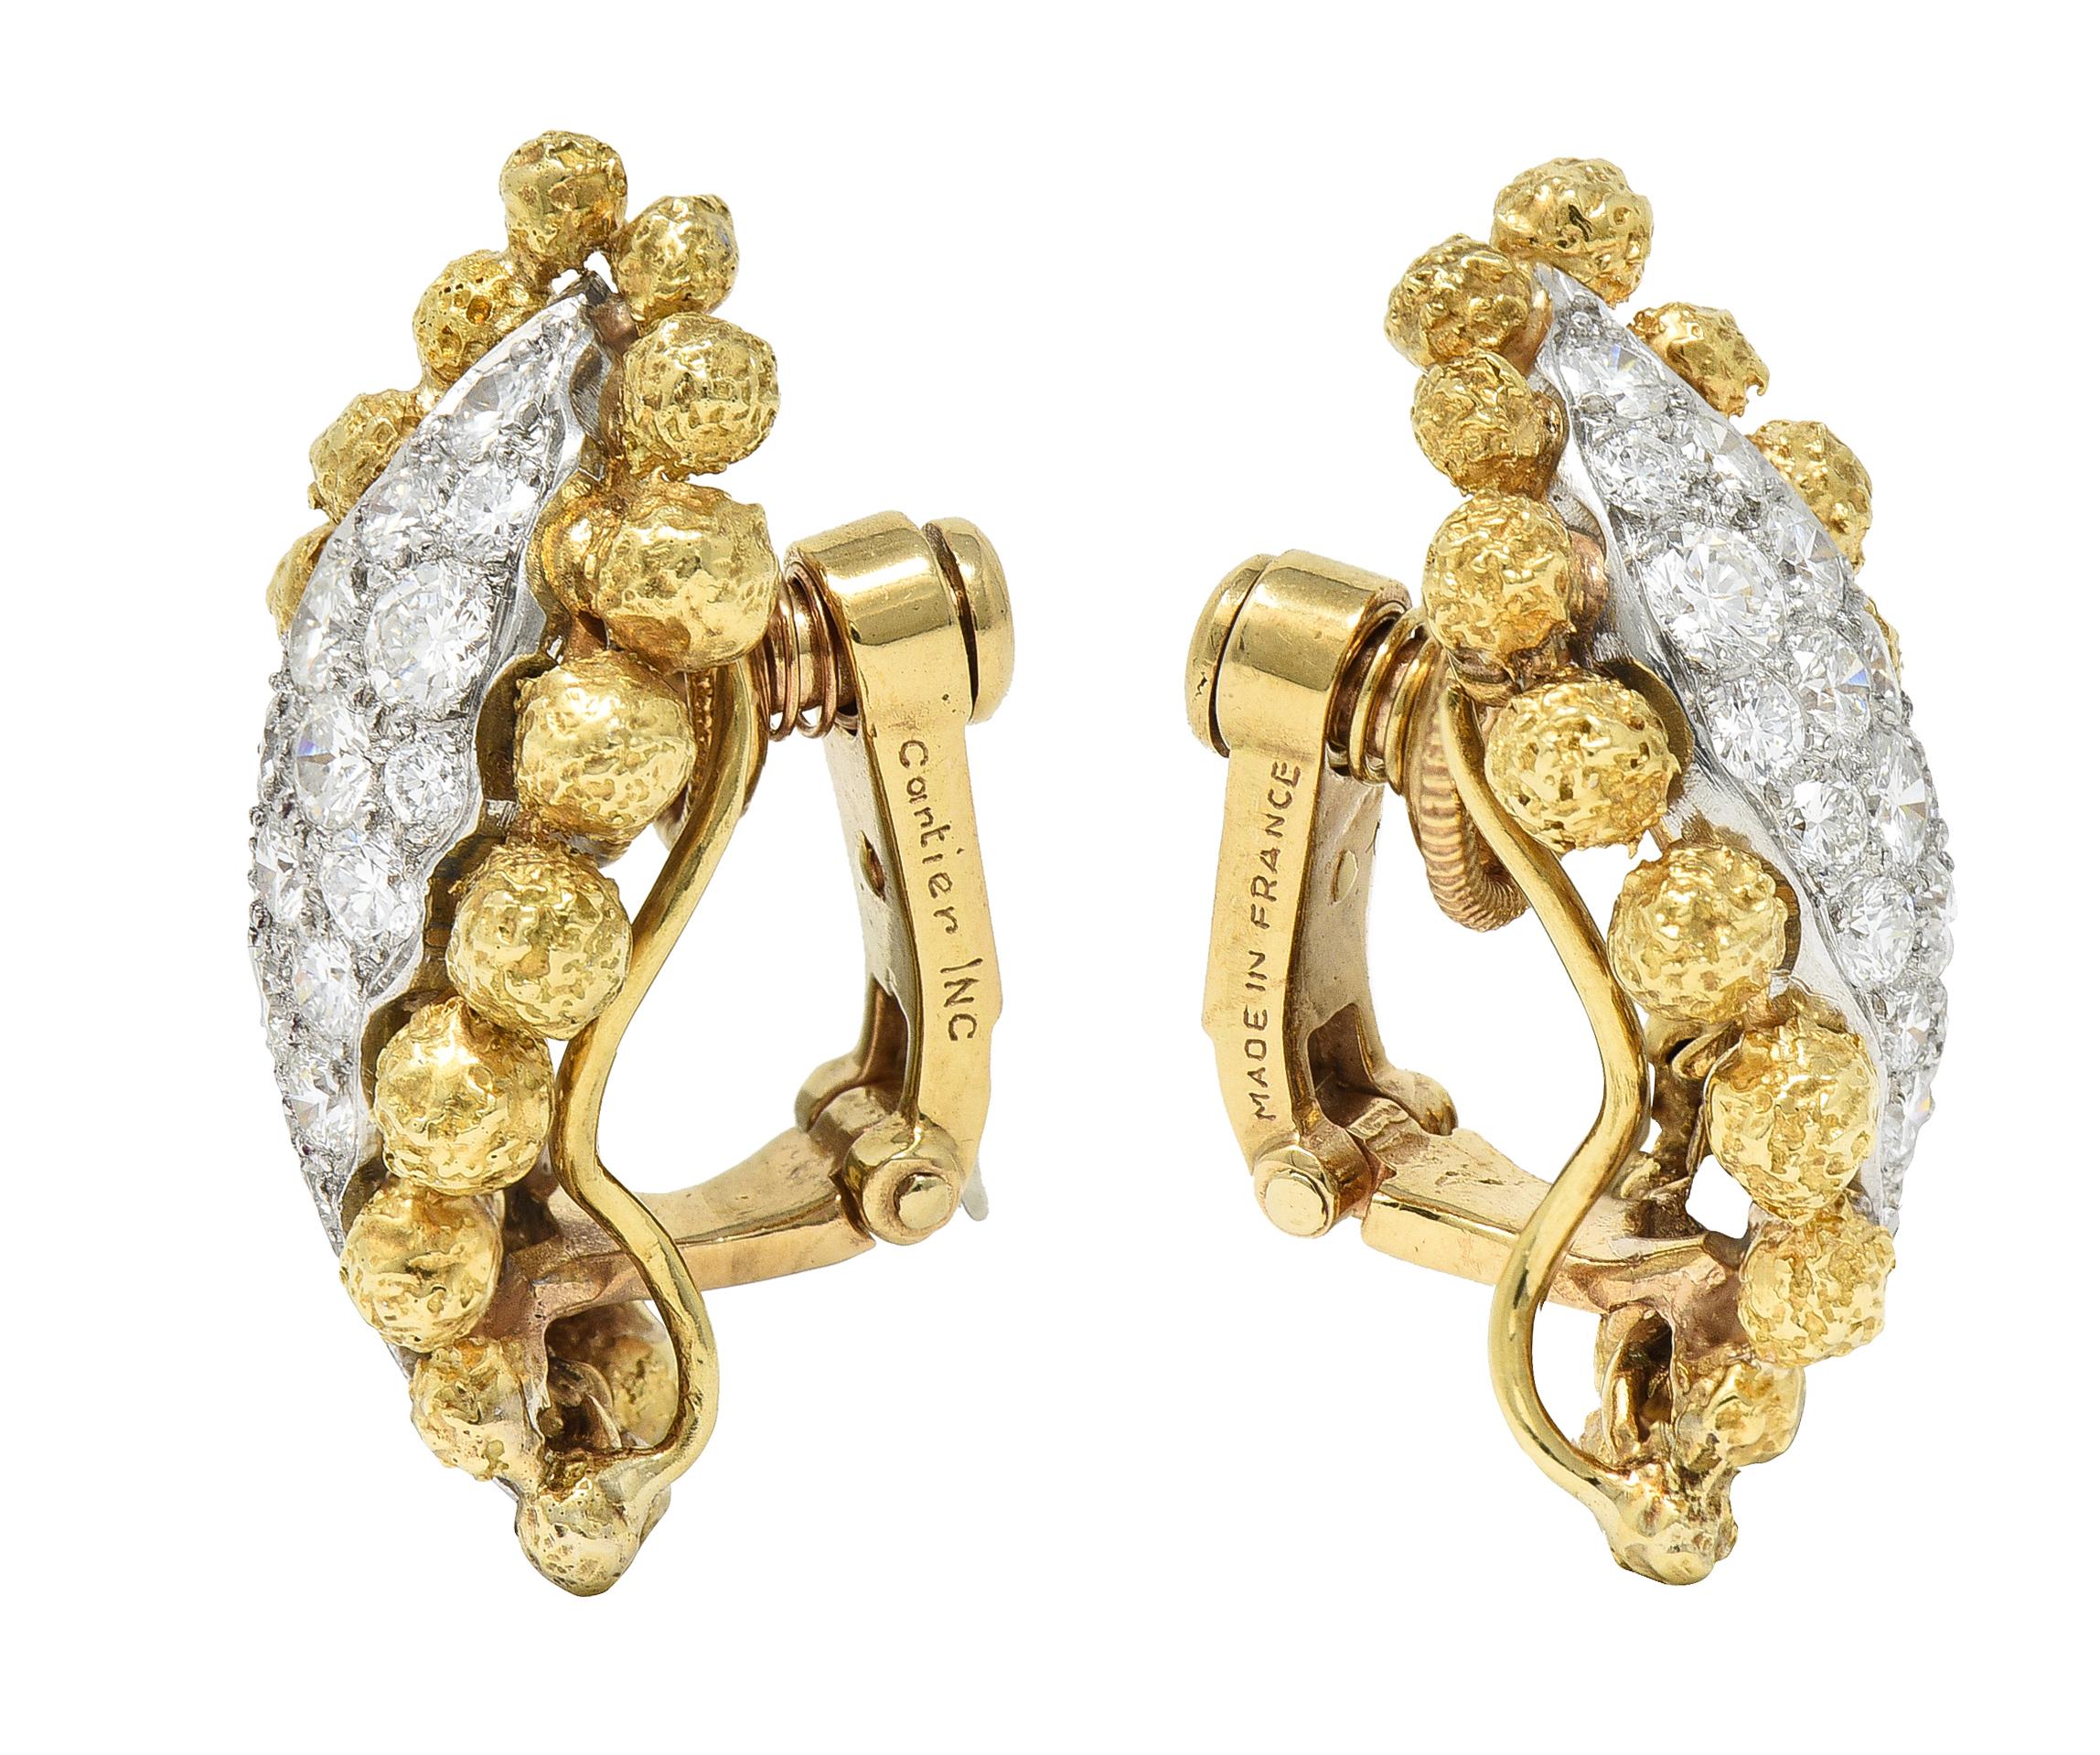 Ear-clips are designed as a slightly torqued platinum tendril with a textured gold ball surround. Platinum is pavè set with round brilliant cut diamonds. Total diamond weight is approximately 2.36 carats - F/G color and primarily VS clarity.